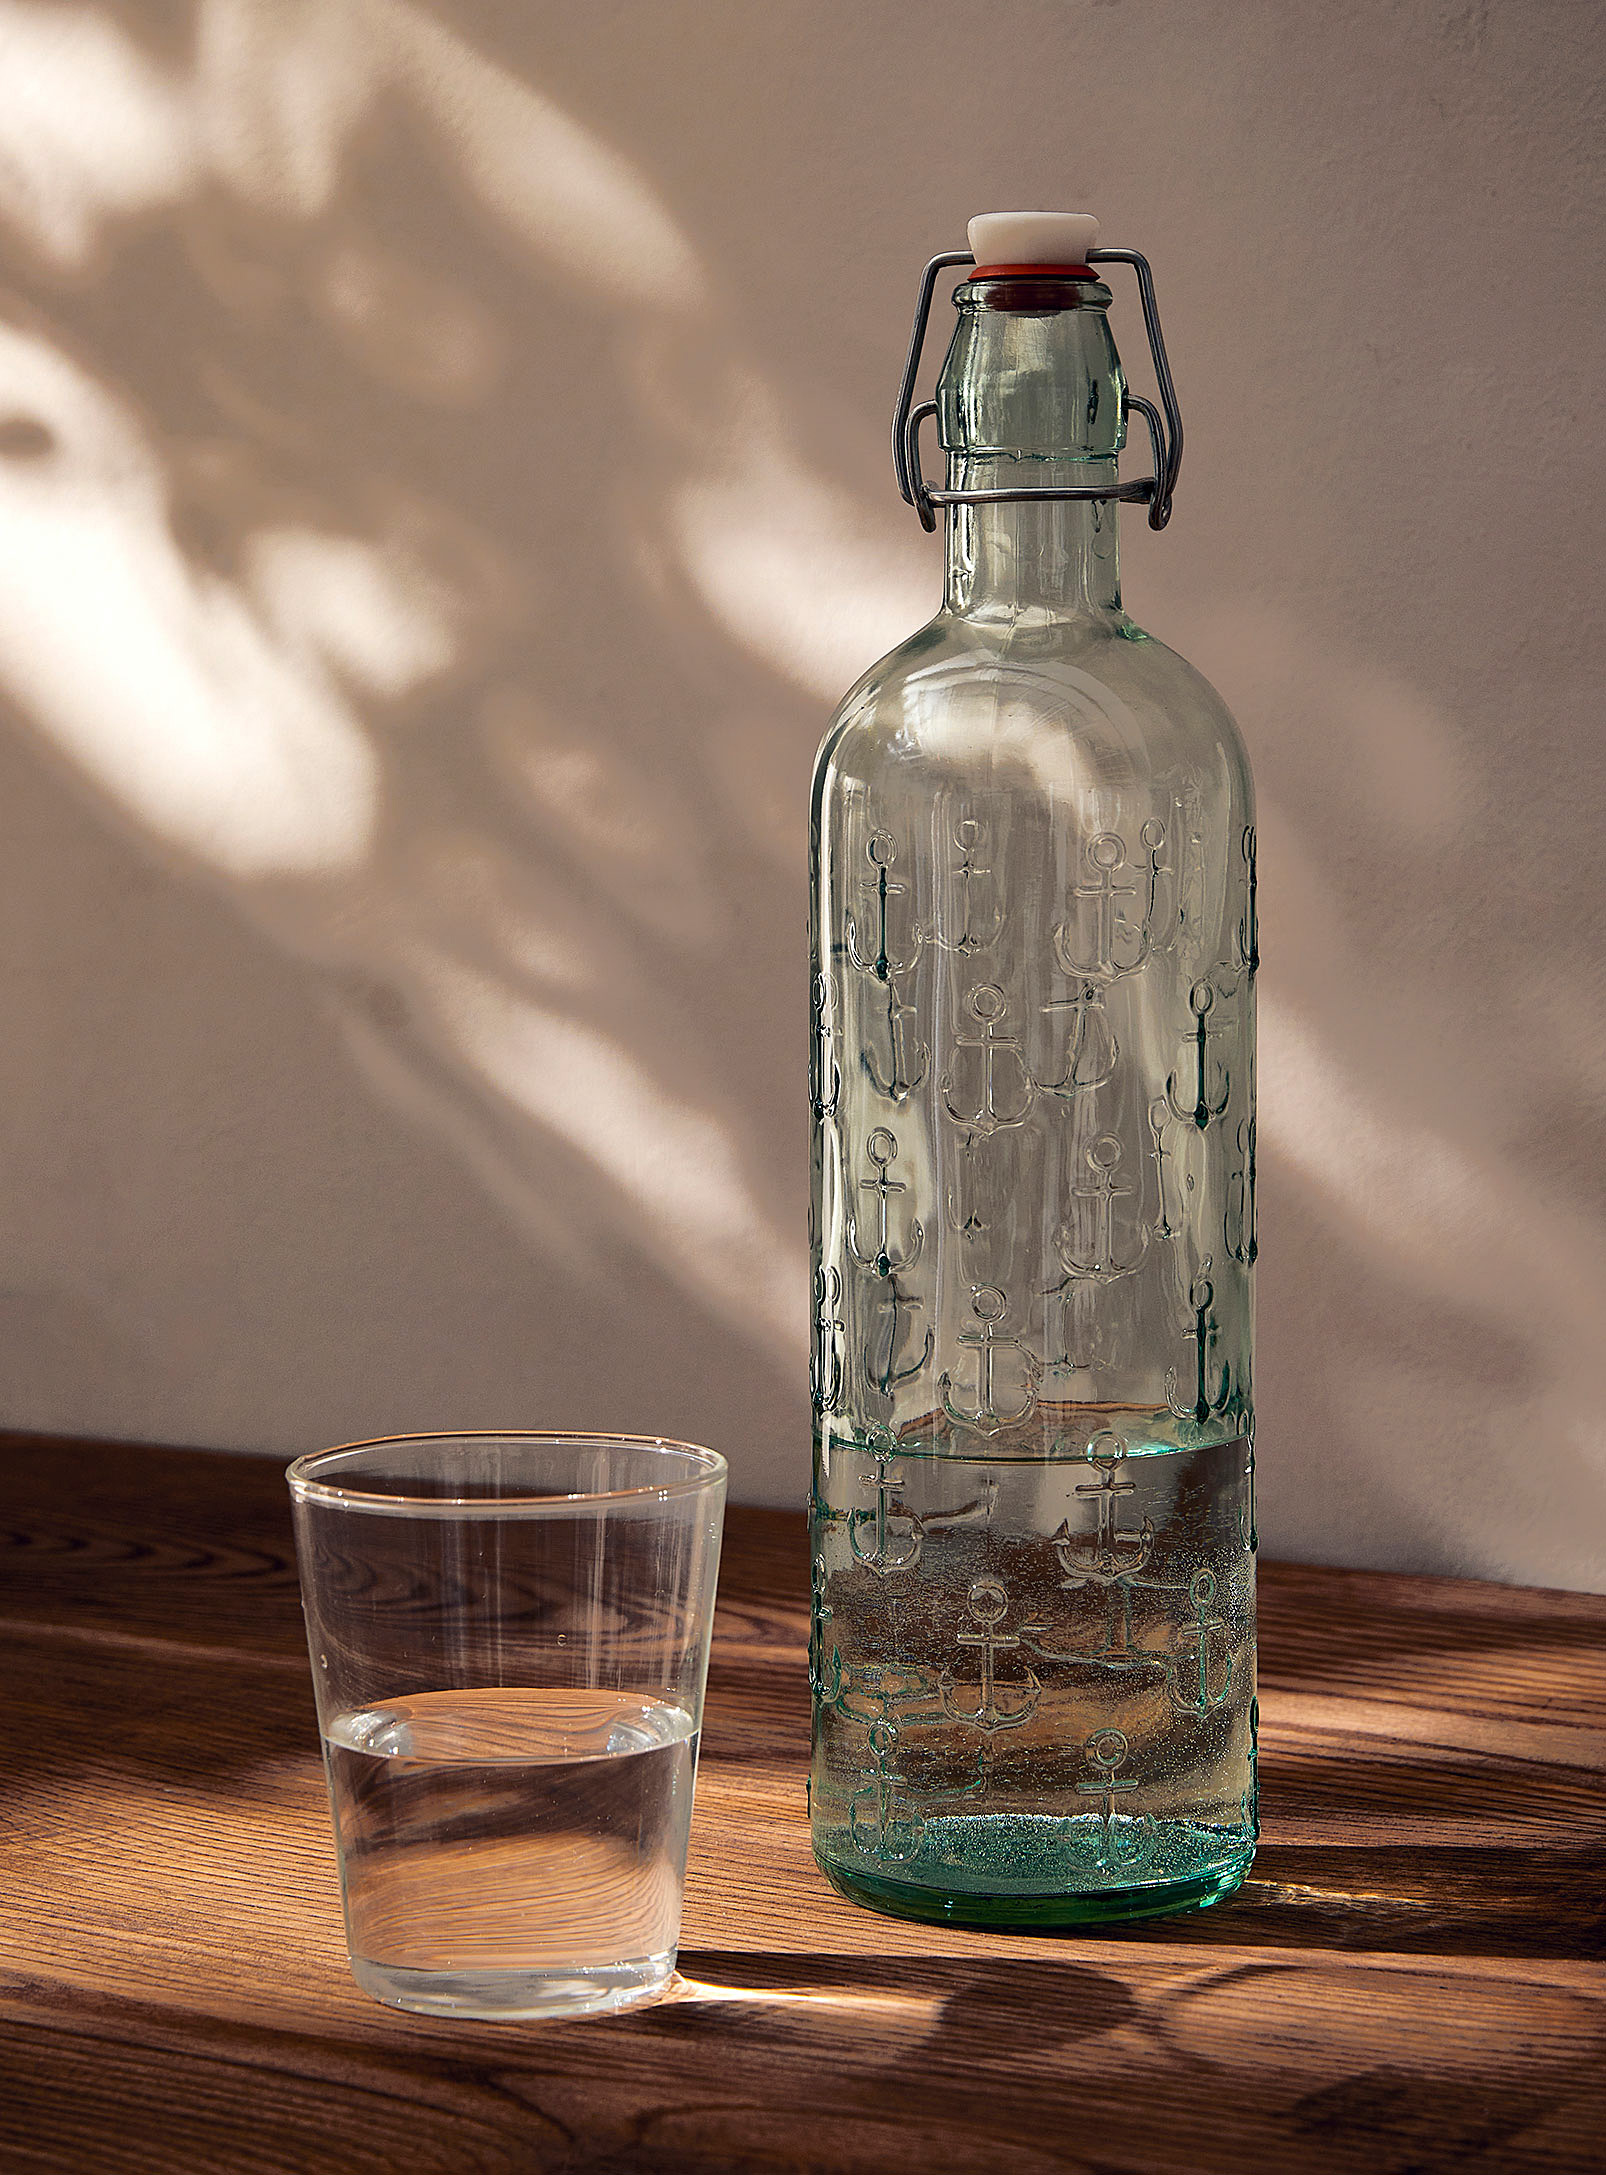 Simons Maison - Anchor recycled glass bottle